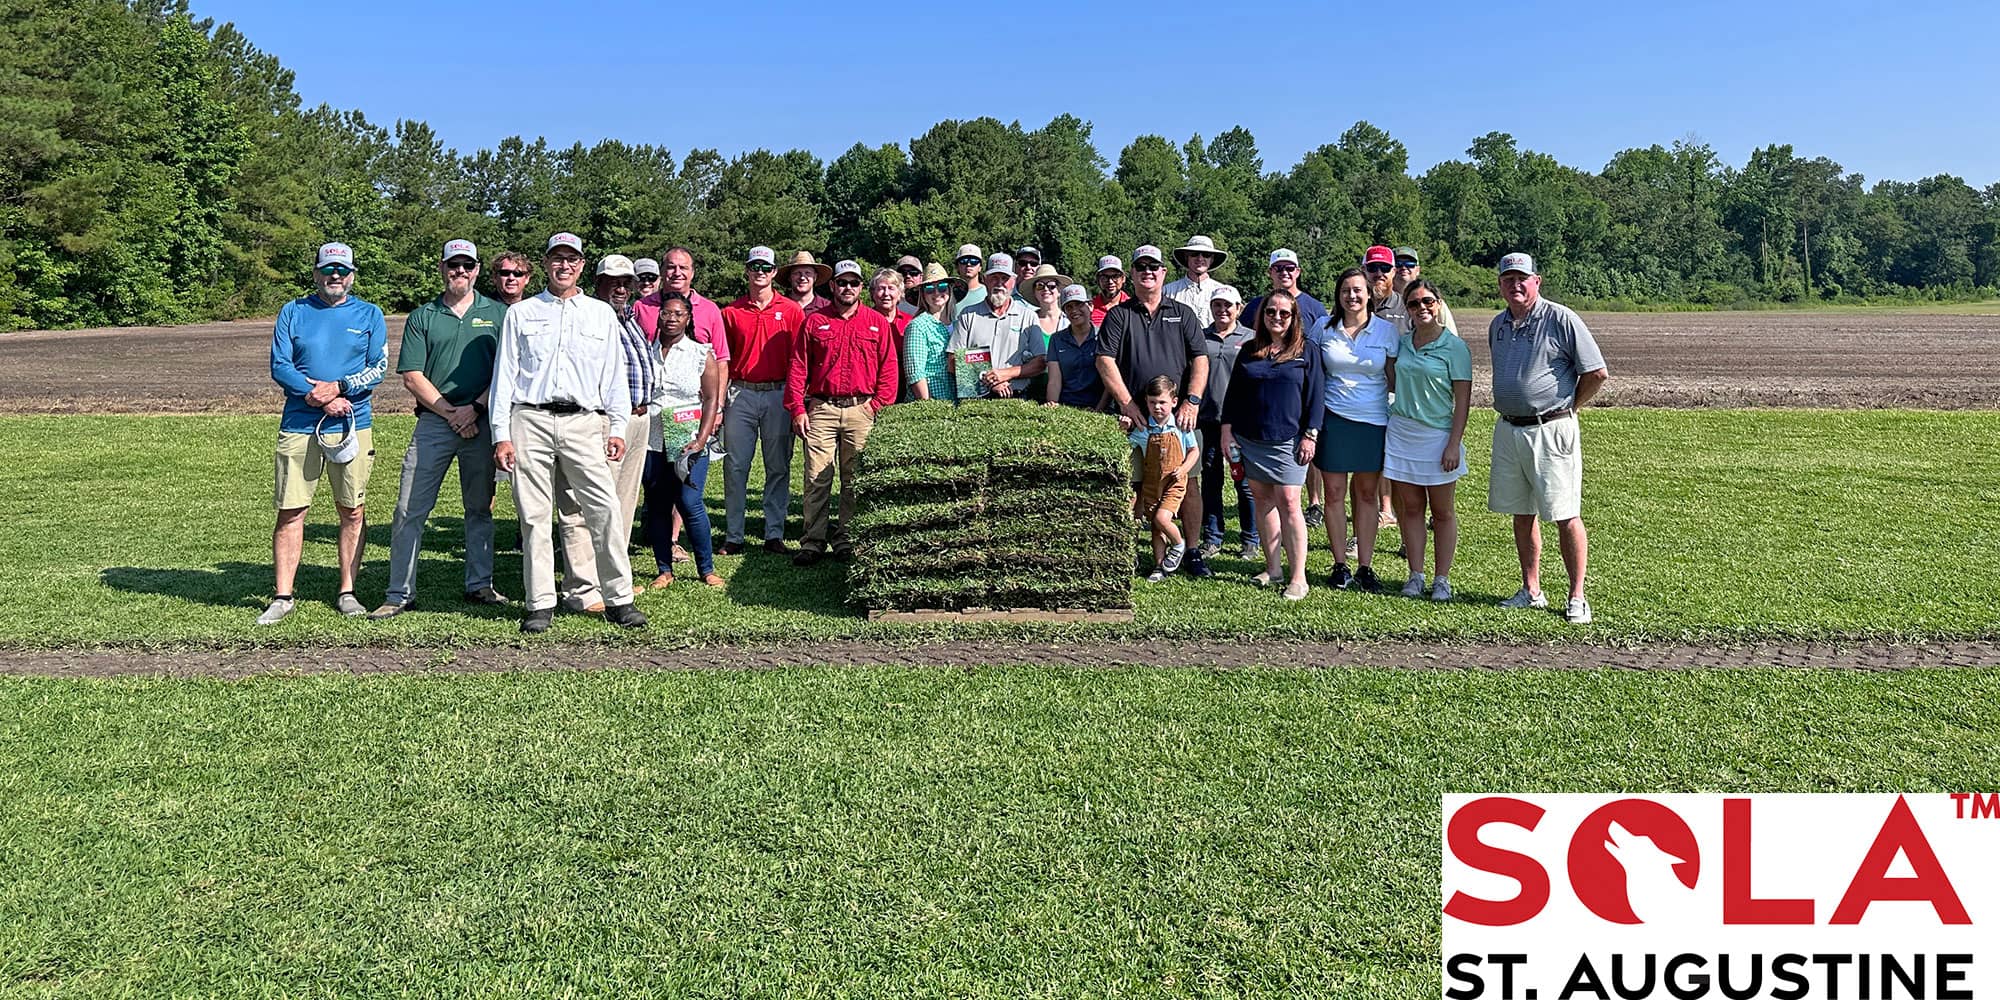 Licensing Period Opens for Sola™ St. Augustinegrass Following Successful Field Day at Oakland Plantation